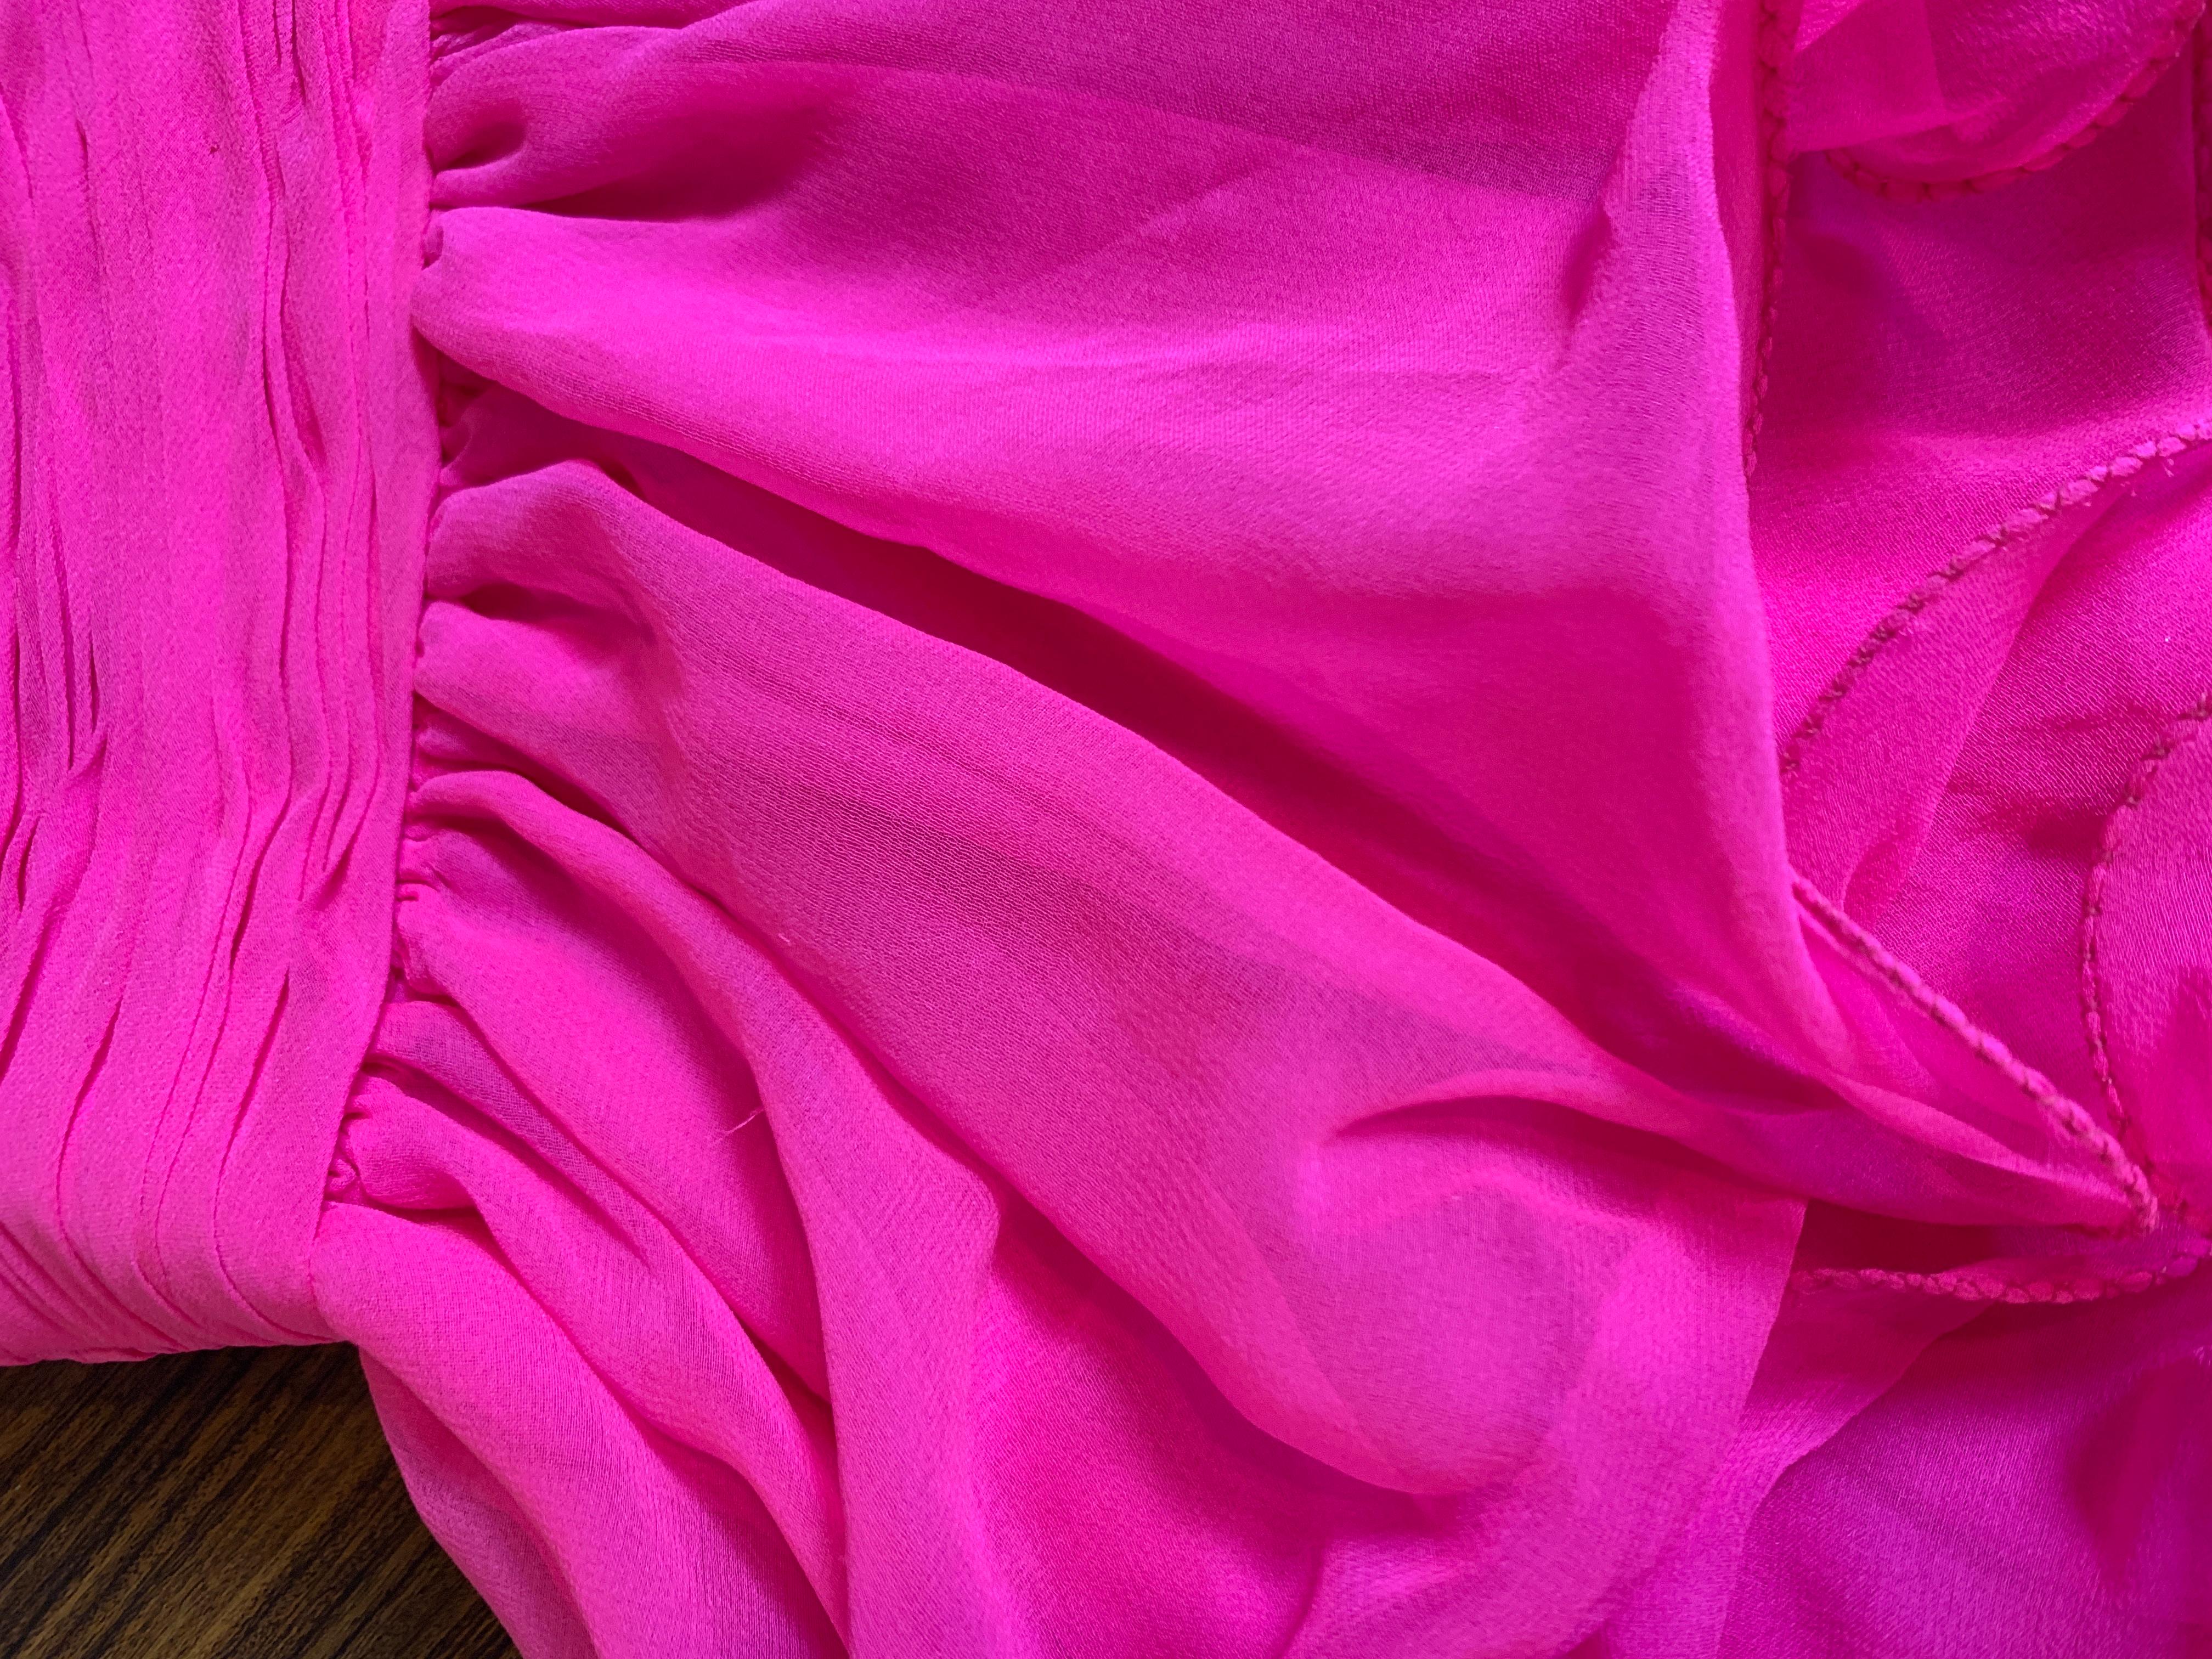 Stephen Yearick 1990s Bright Pink Ruffle Scarf and Strapless Dress 3